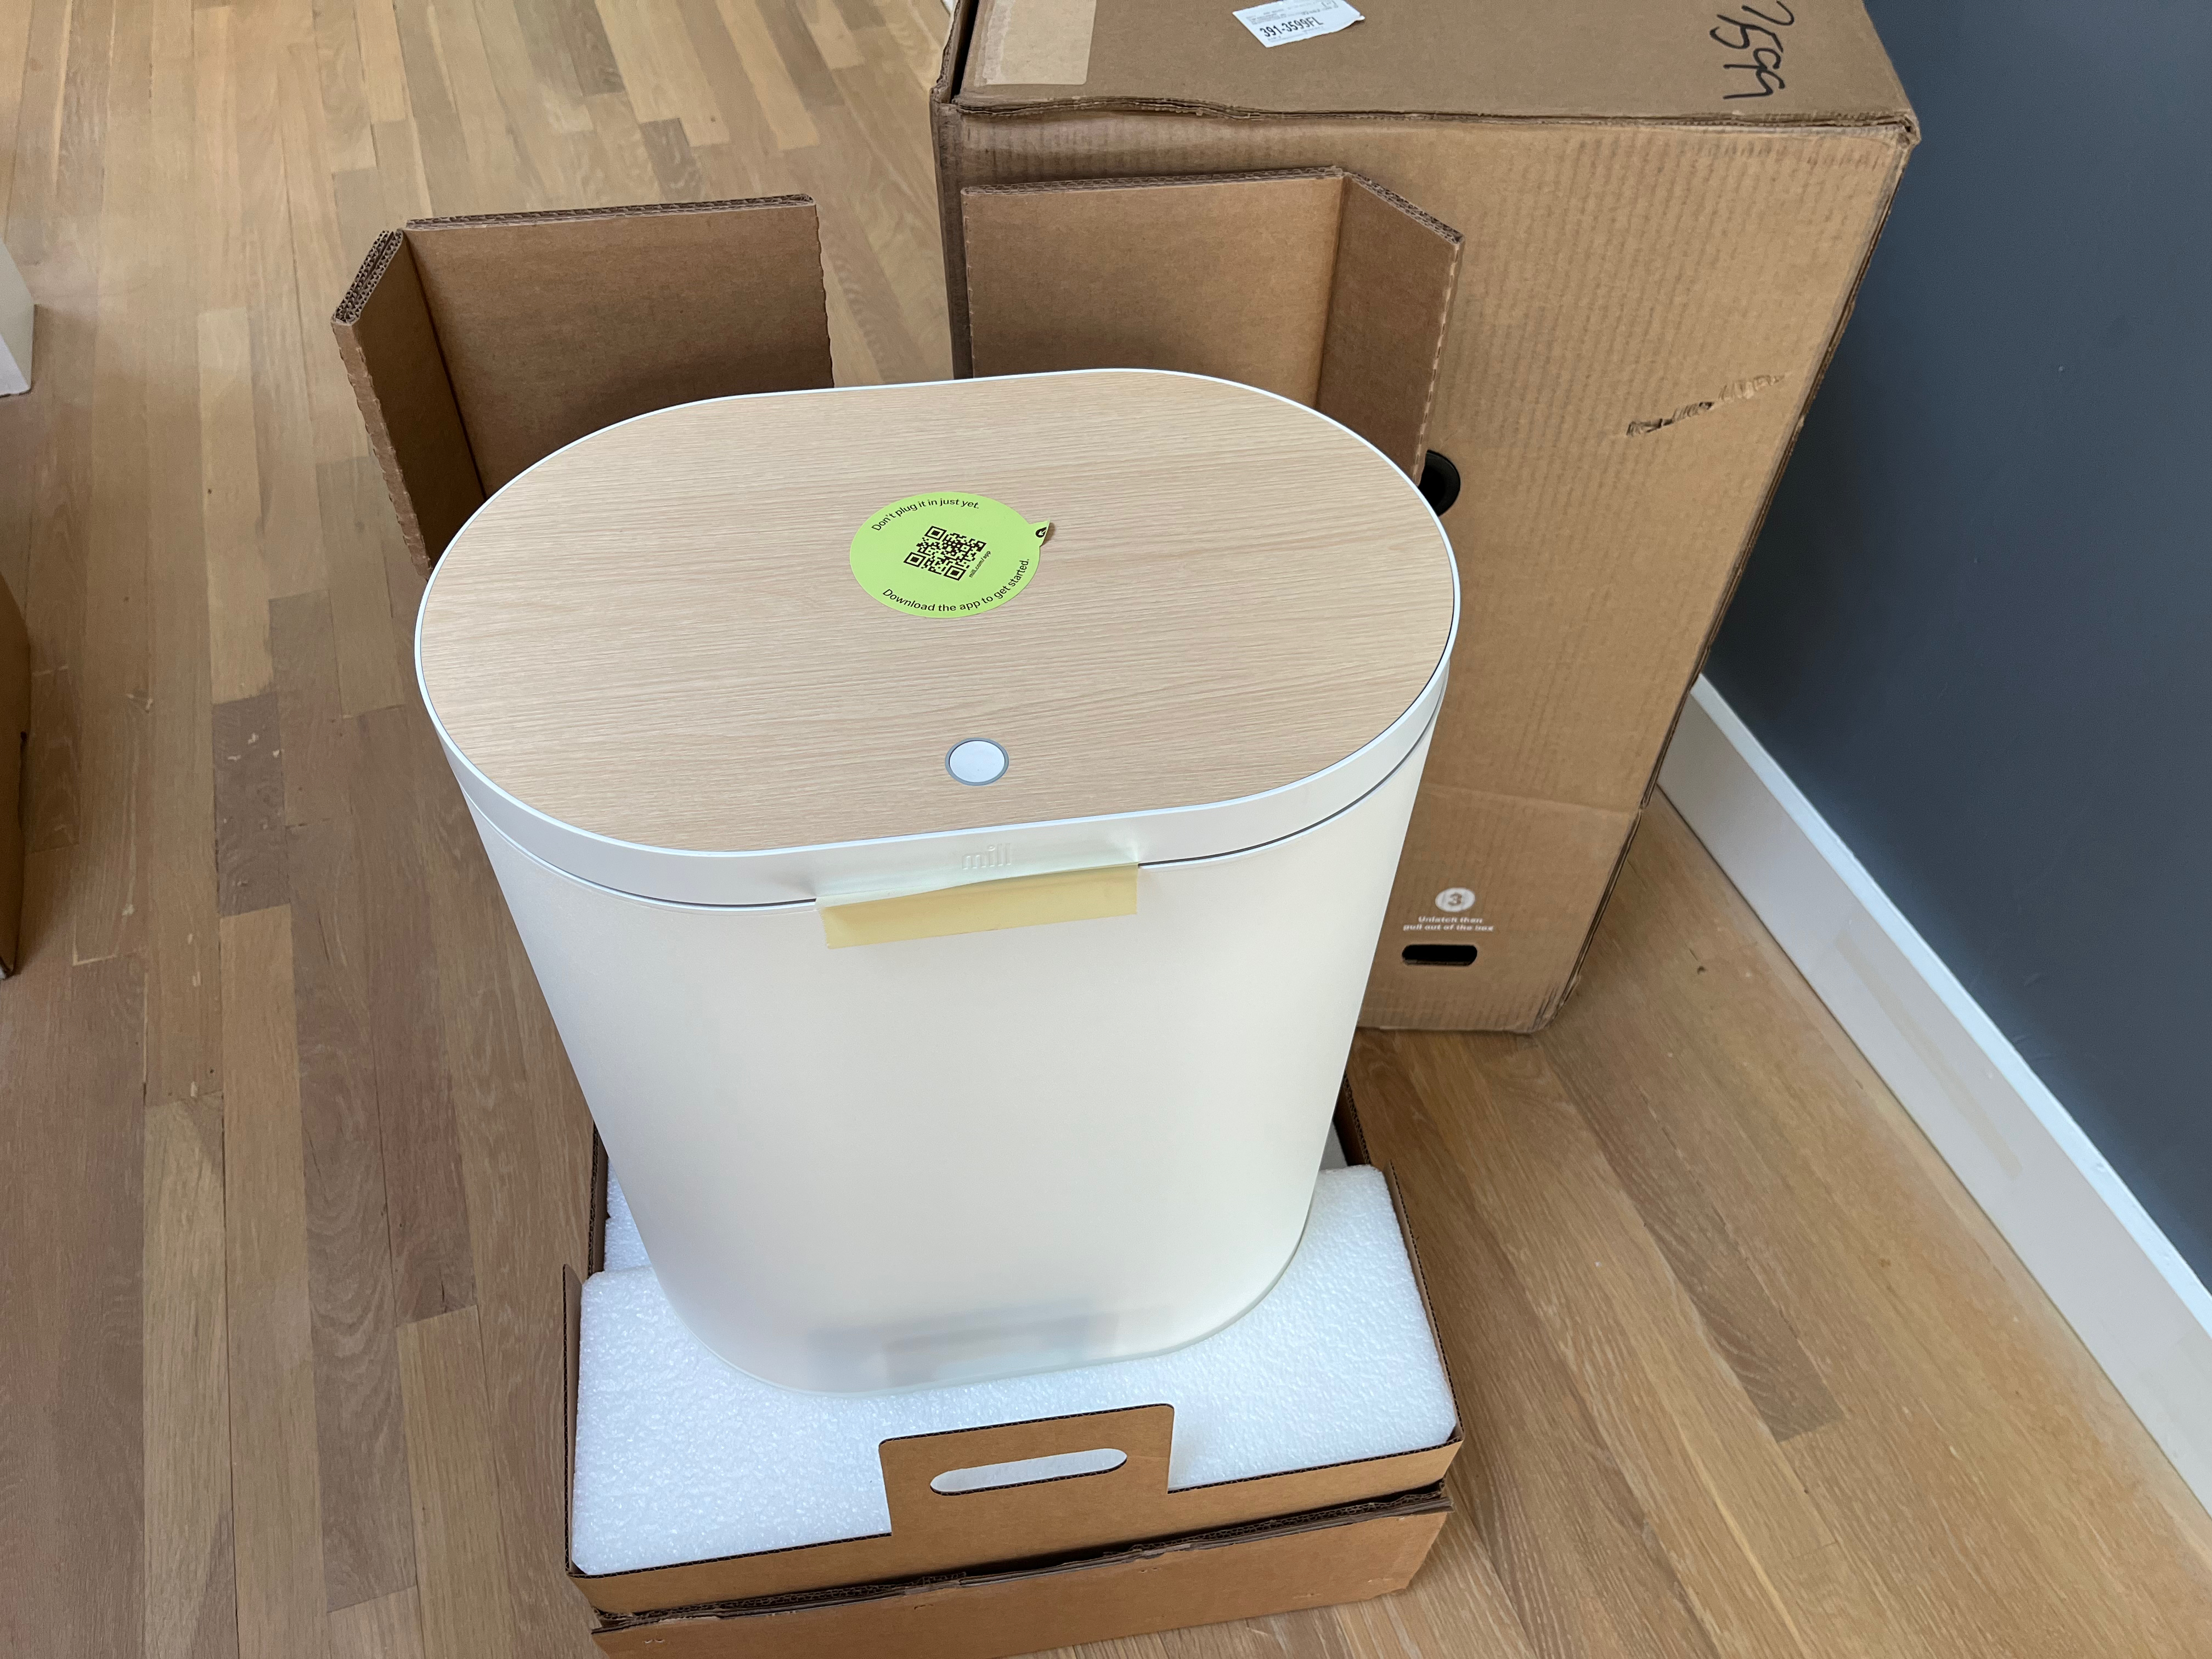 Unboxing the Mill food waste bin